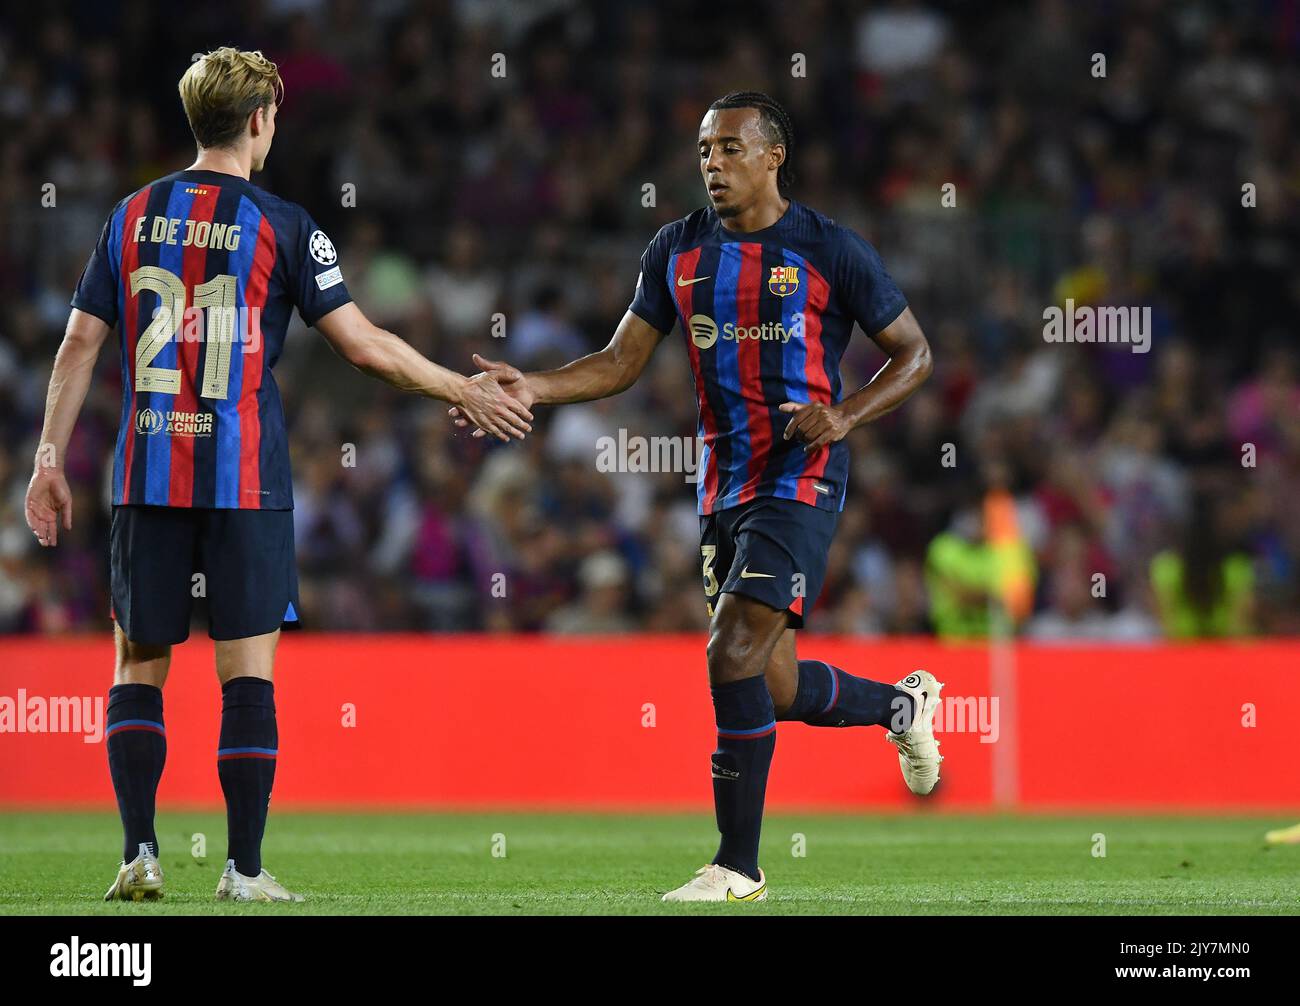 Barcelona, Spain. 07th Sep, 2022. FC BARCELONA vs FC VIKTORIA PLZEN Frenkie de Jong (21) of FC Barcelona and Jules Kounde (23) of FC Barcelona during the match between FC Barcelona and FC Viktoria Plzen corresponding to the first day of the group stage of the UEFA Champions League at Spotify Camp Nou Stadium in Barcelona, Spain. September 7, 2022. Credit: rosdemora/Alamy Live News Stock Photo